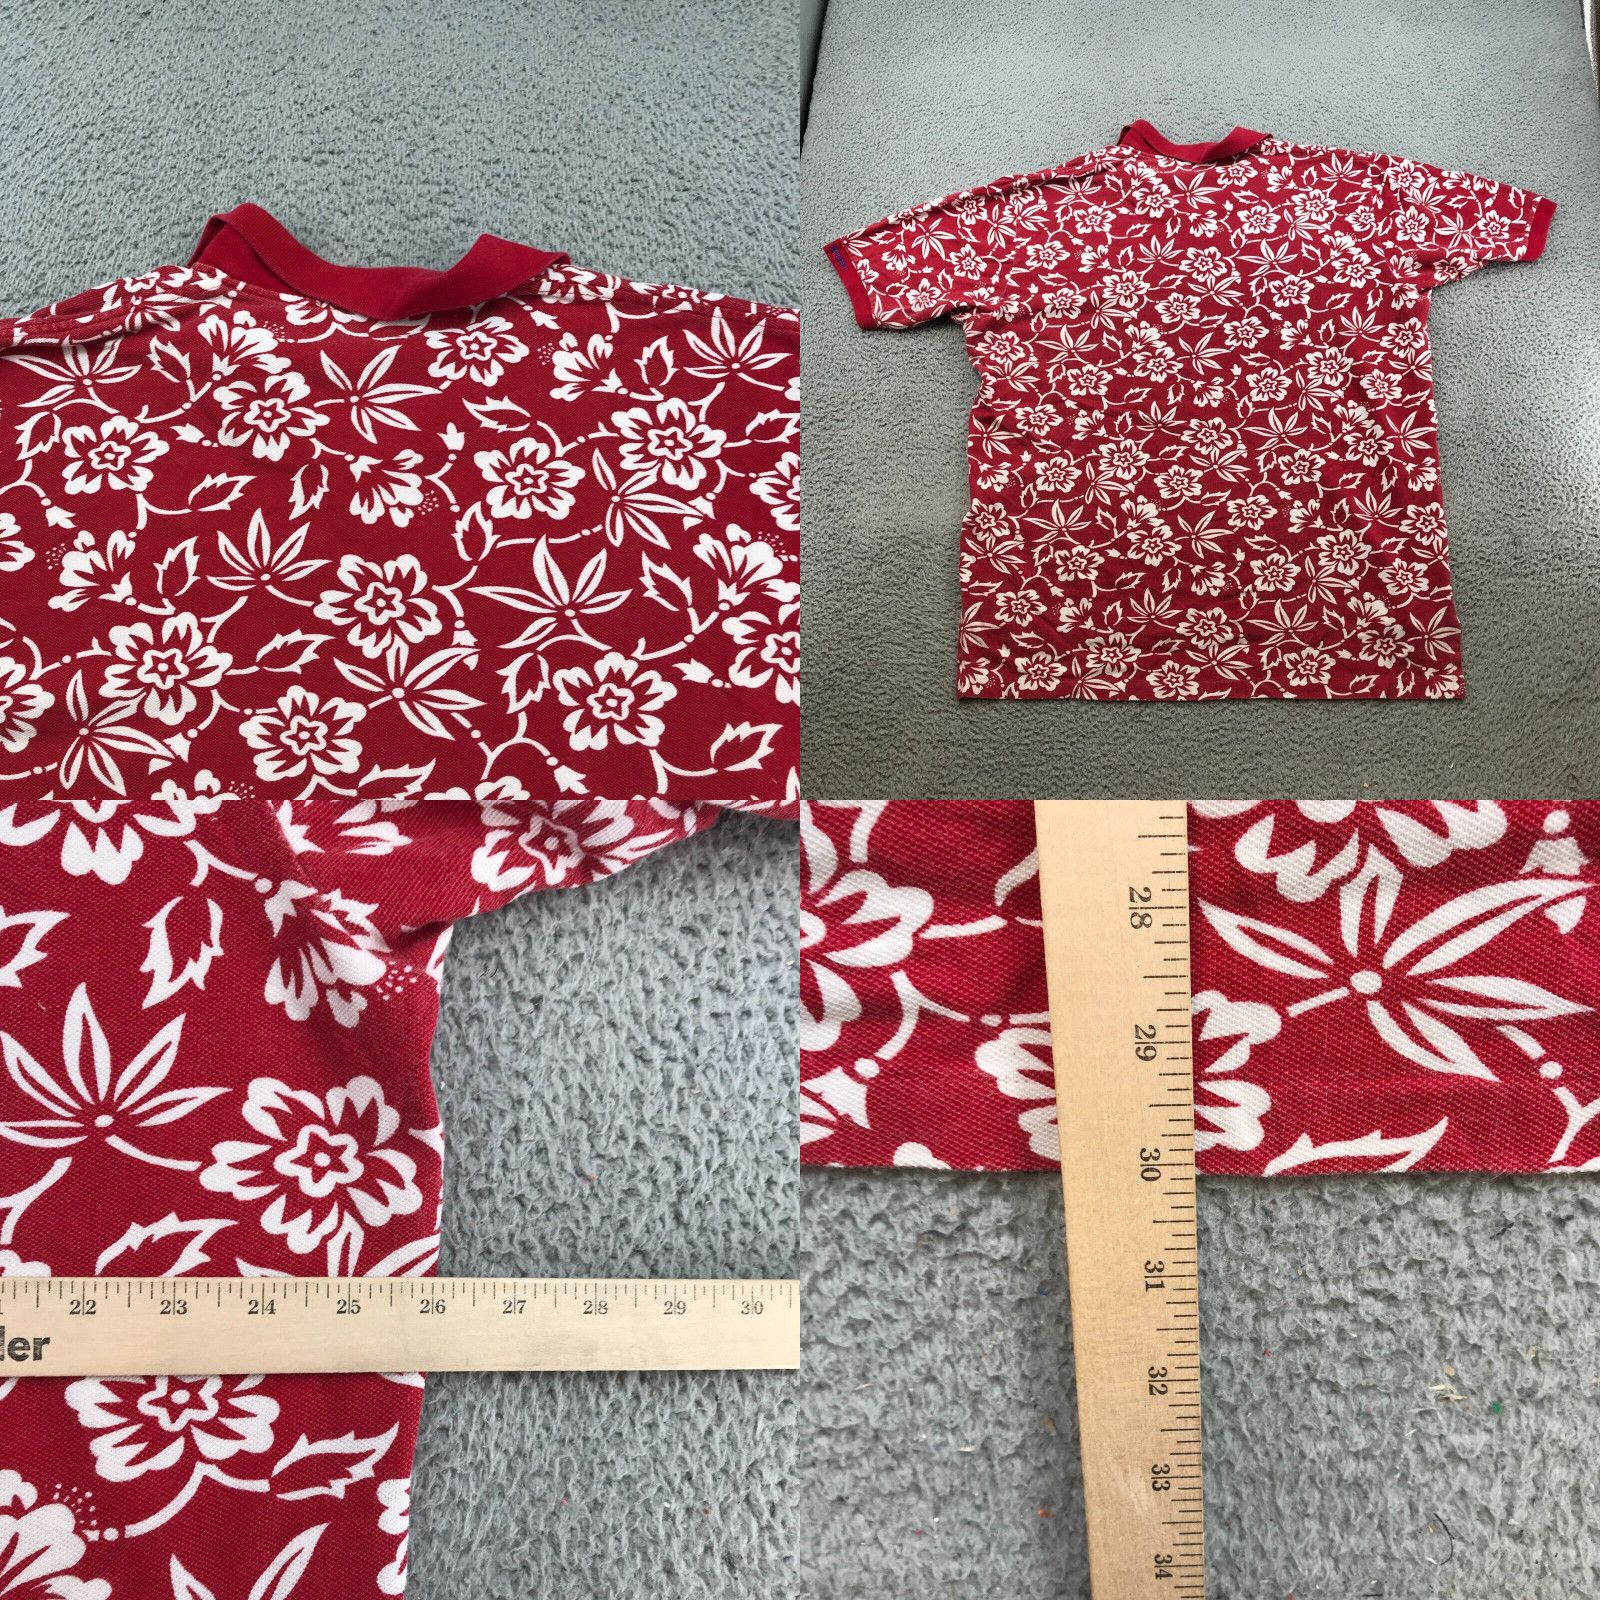 Vintage Vintage Polo Sport Polo Adult XL Red Tropical Hawaiian Short Sleeve 47229 Size US XL / EU 56 / 4 - 4 Preview